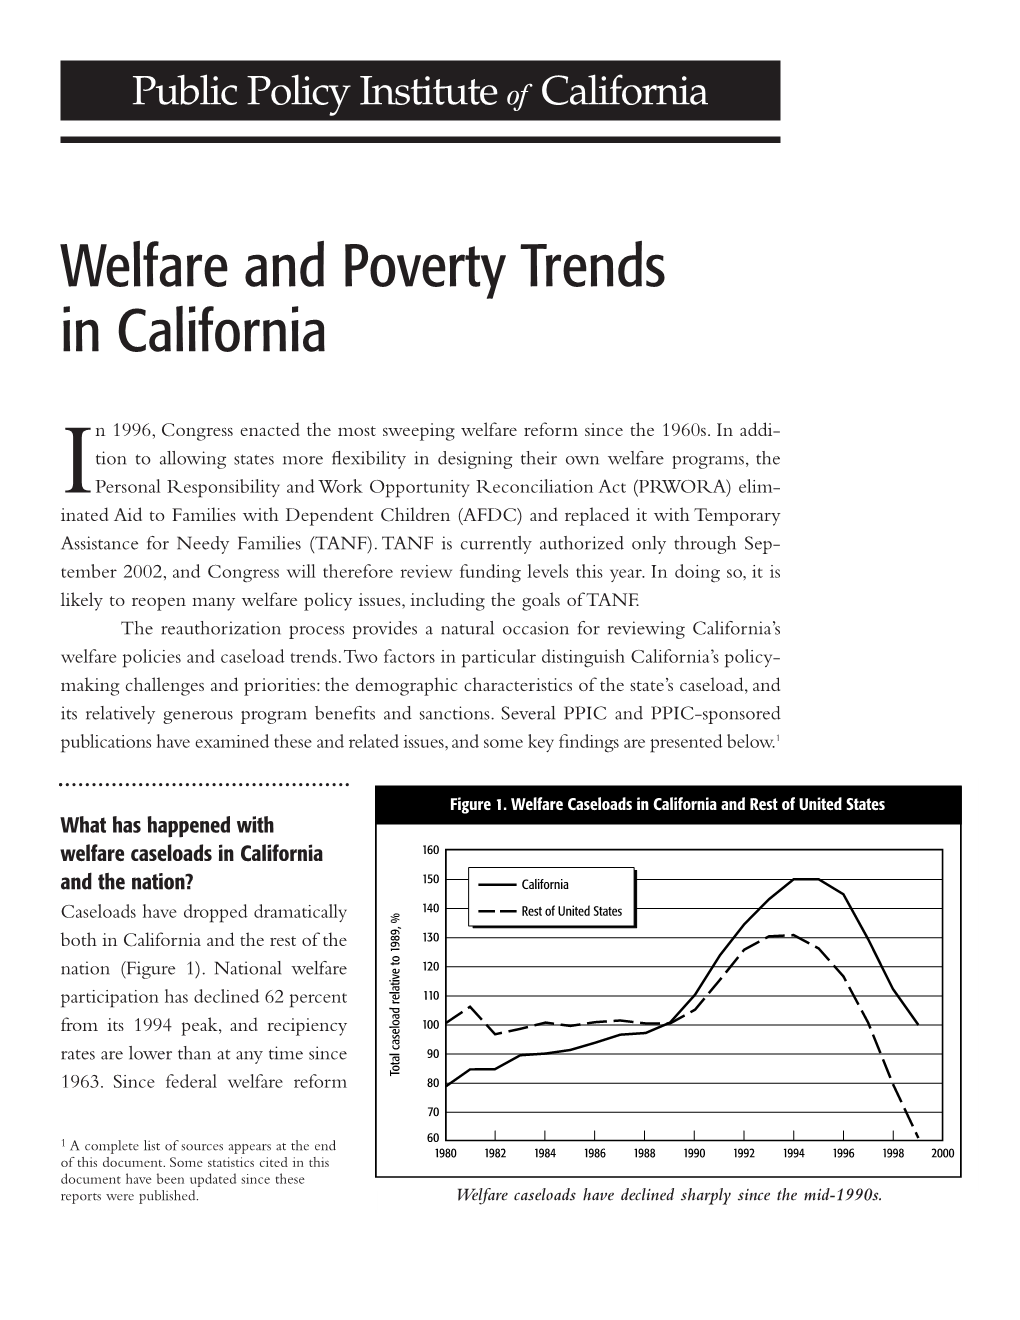 Welfare and Poverty Trends in California